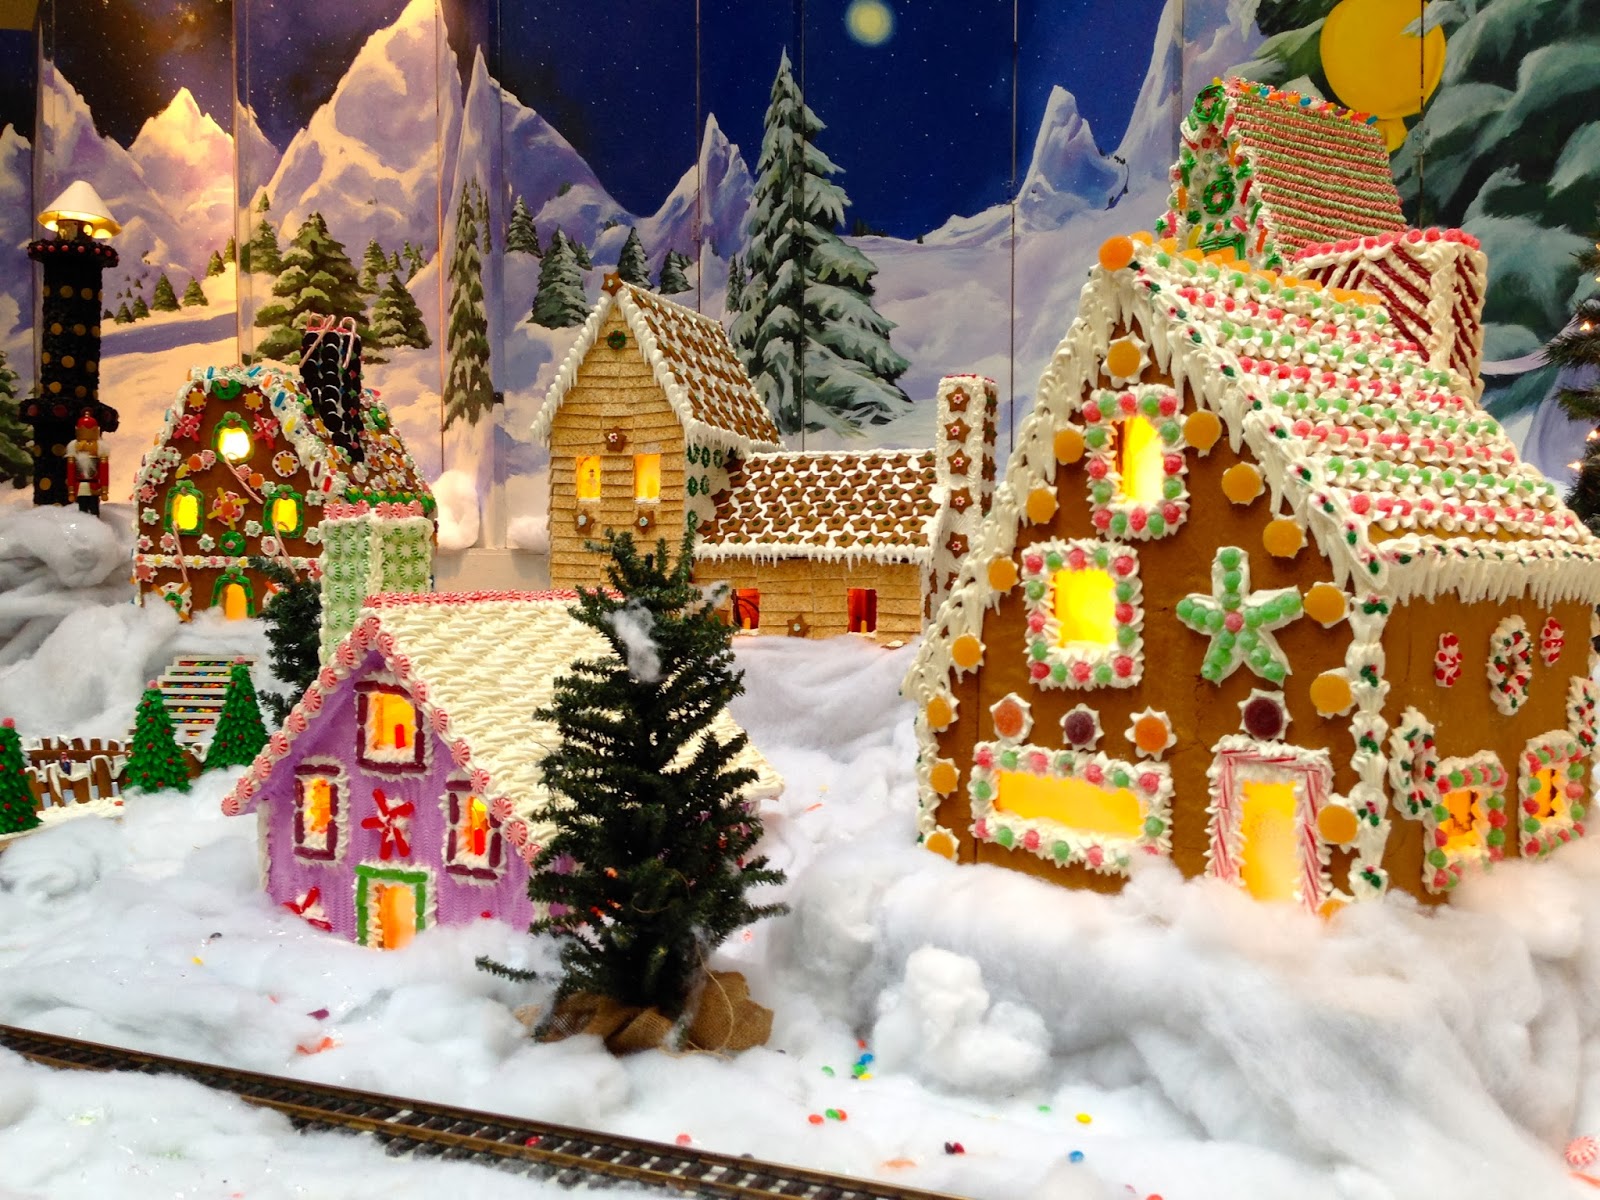 1000+ images about Gingerbread House Village Scenes on Pinterest